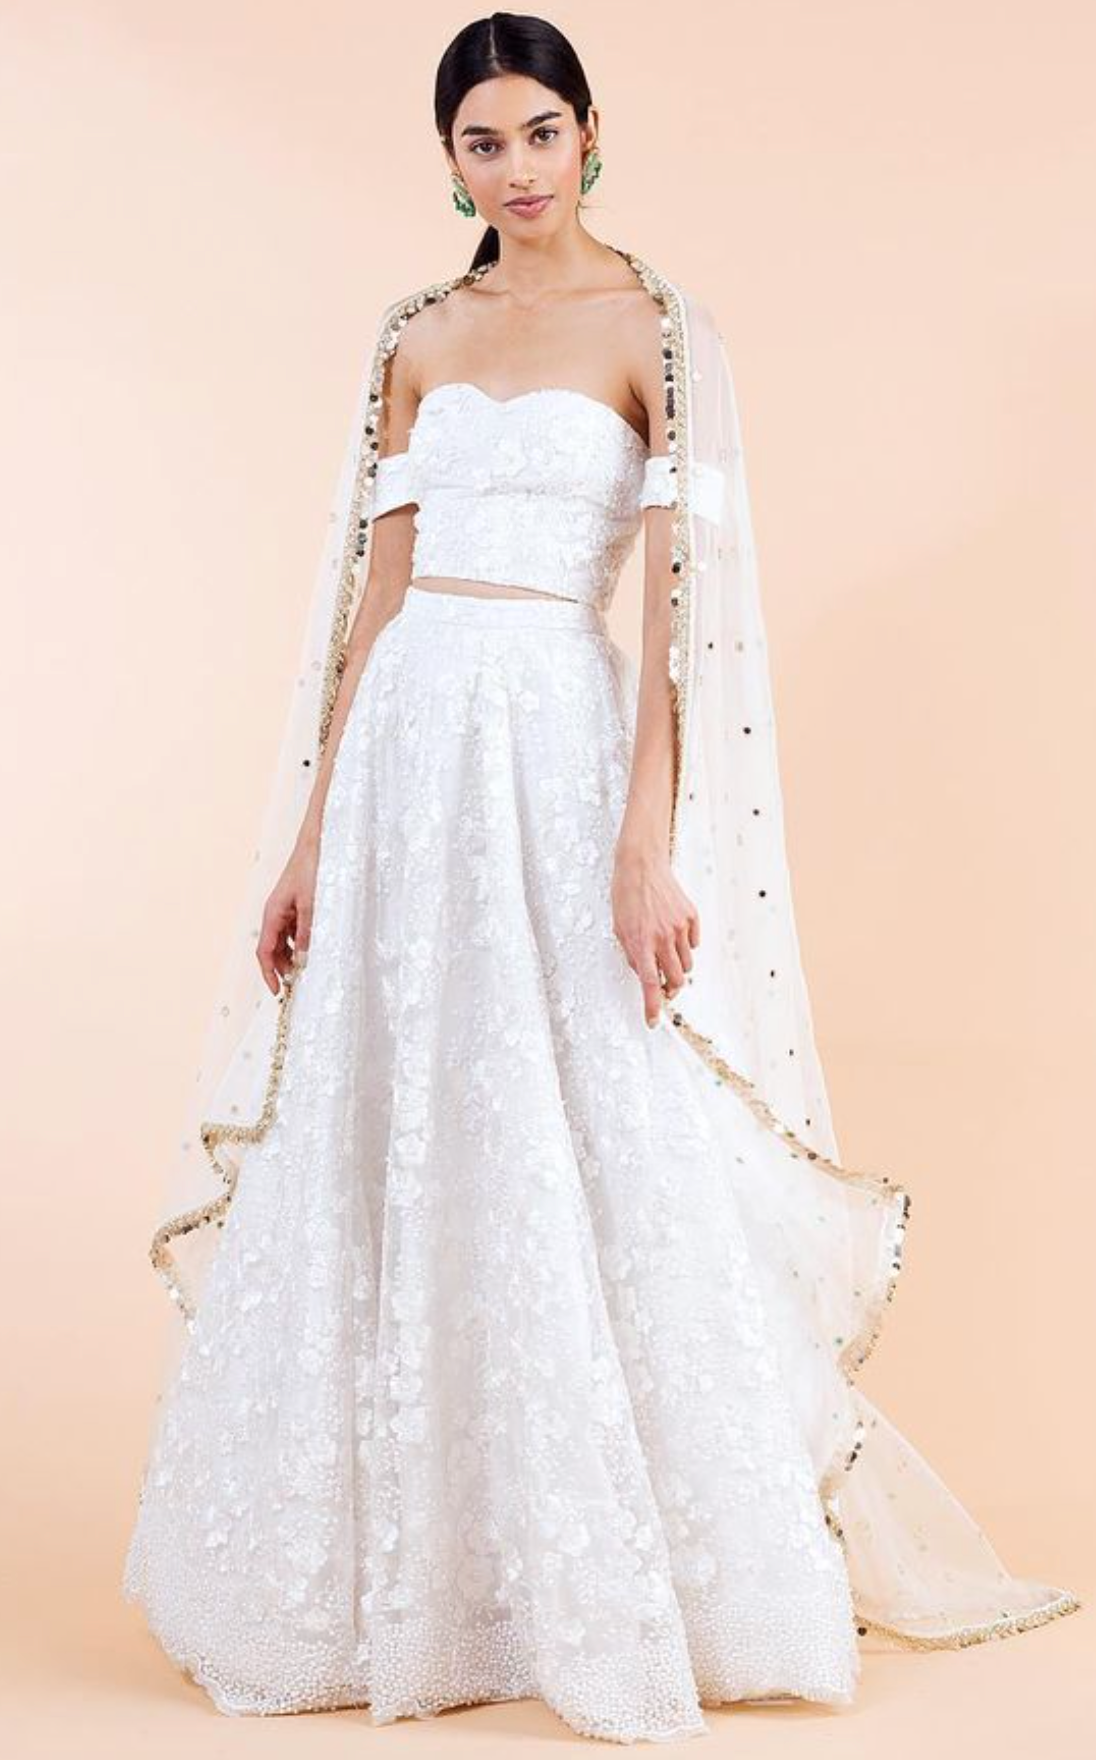 Bridal White dress with Savannah Top and Skirt in White is perfect for Brides, Designer: Mani K Jassal